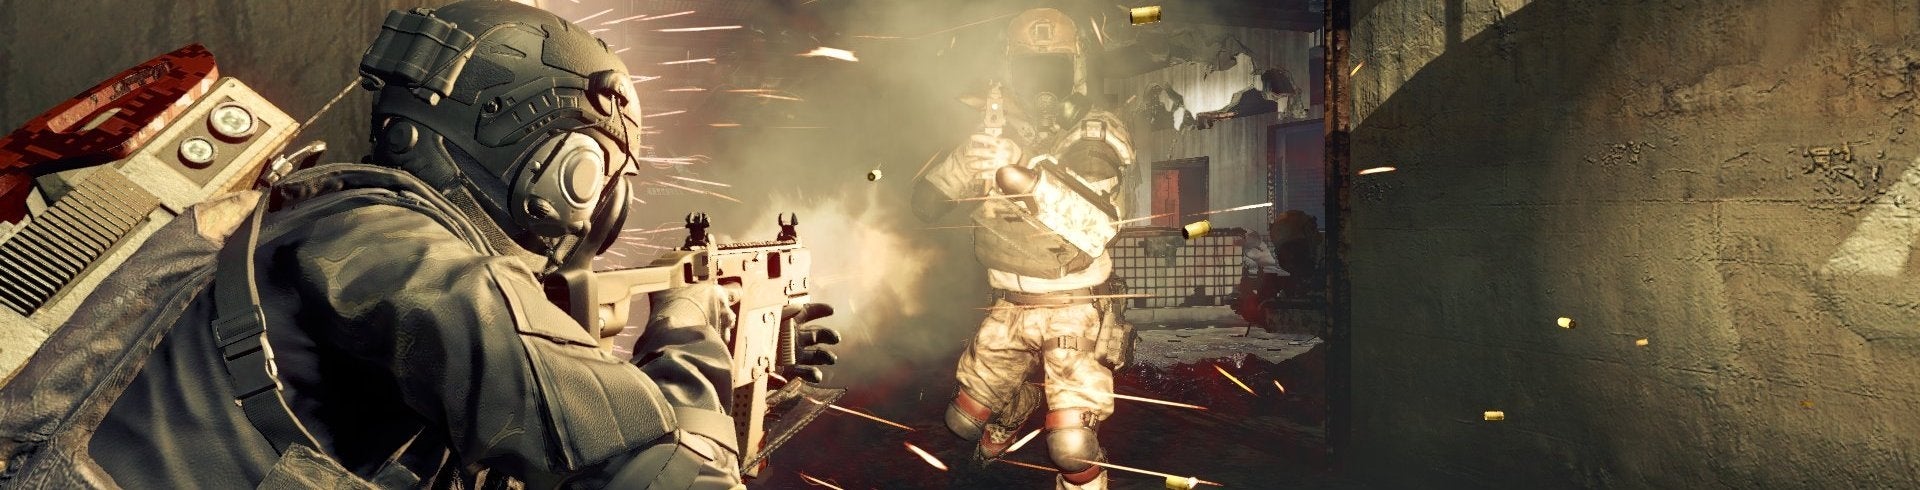 Image for Umbrella Corps isn't the Resident Evil game you were hoping for